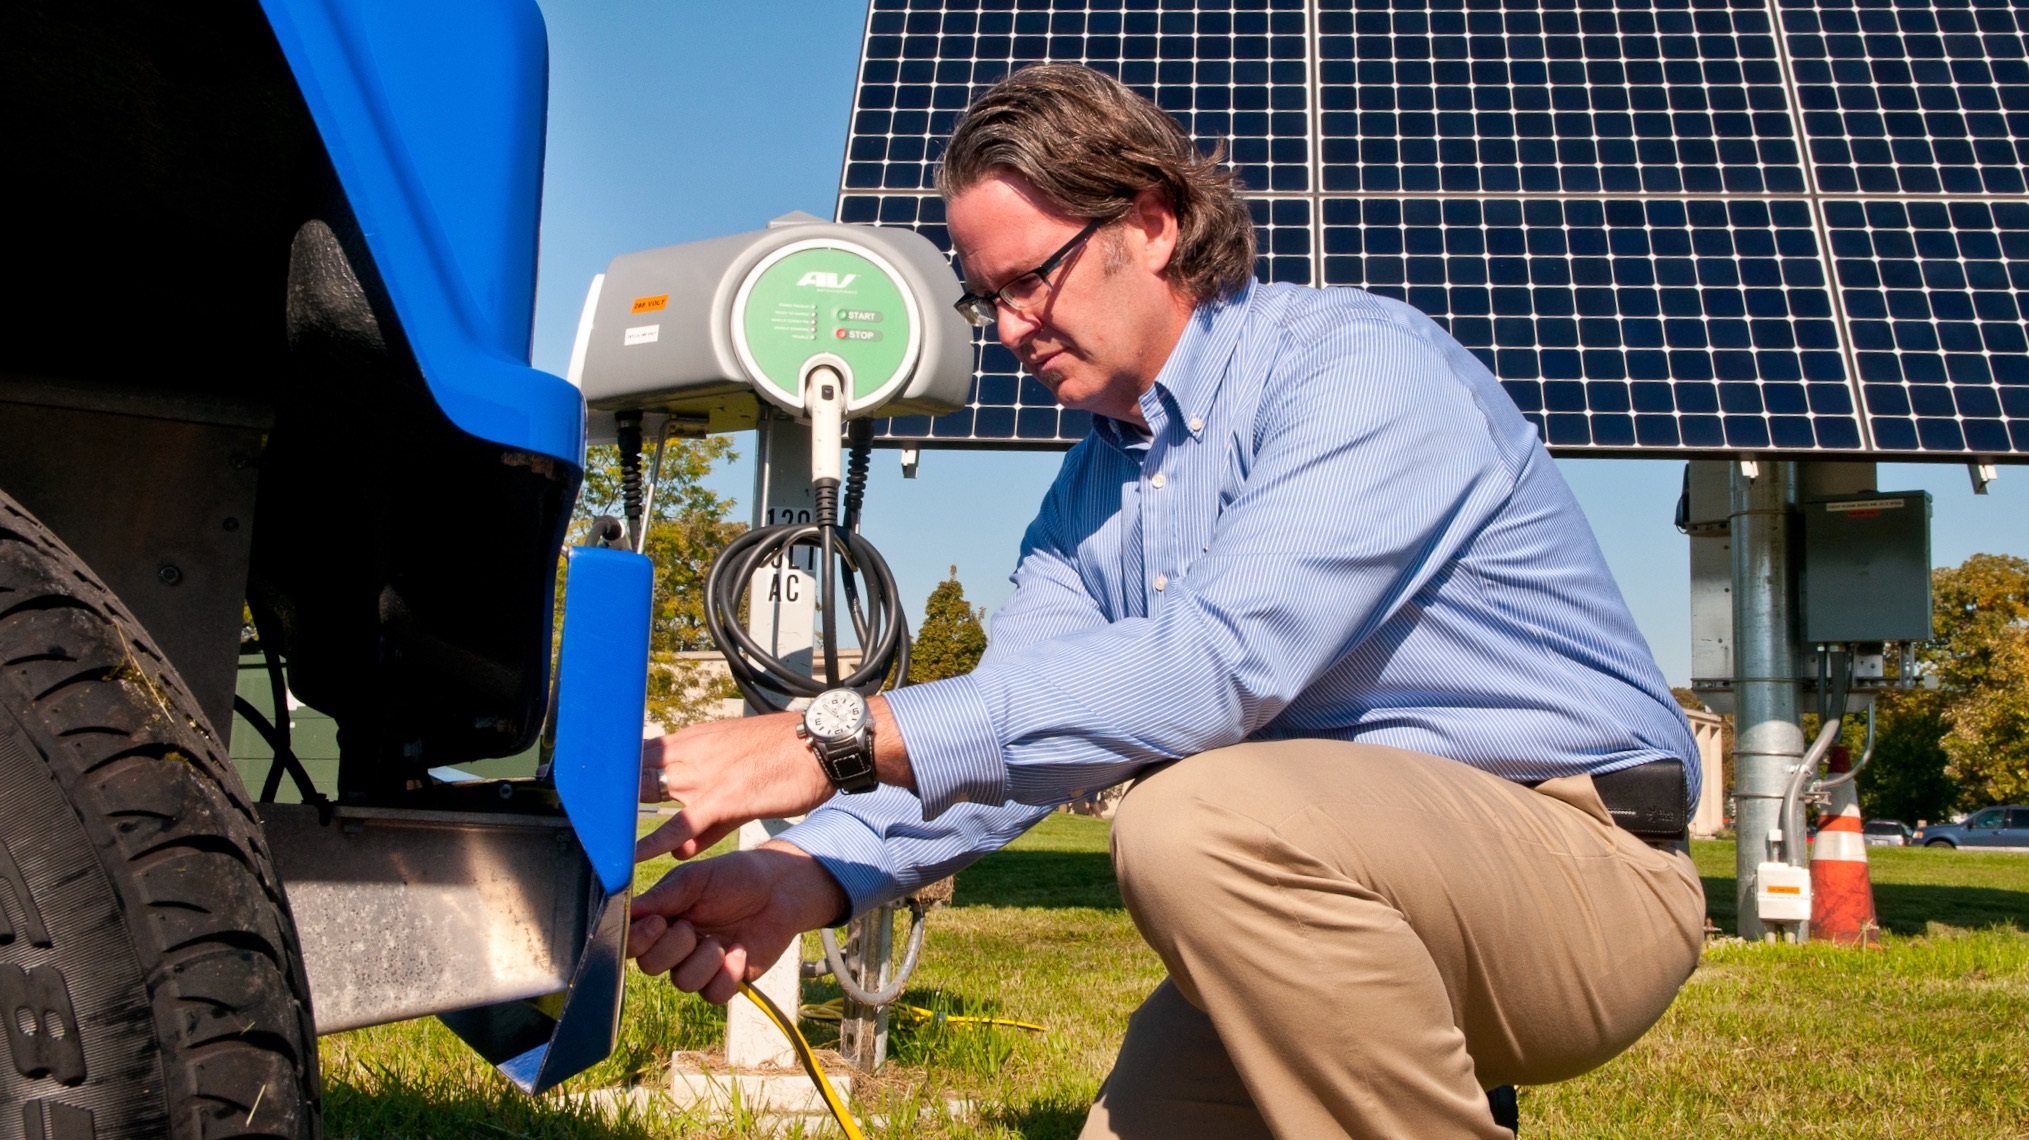 Male scientist kneeling near a vehicle with solar panels in background